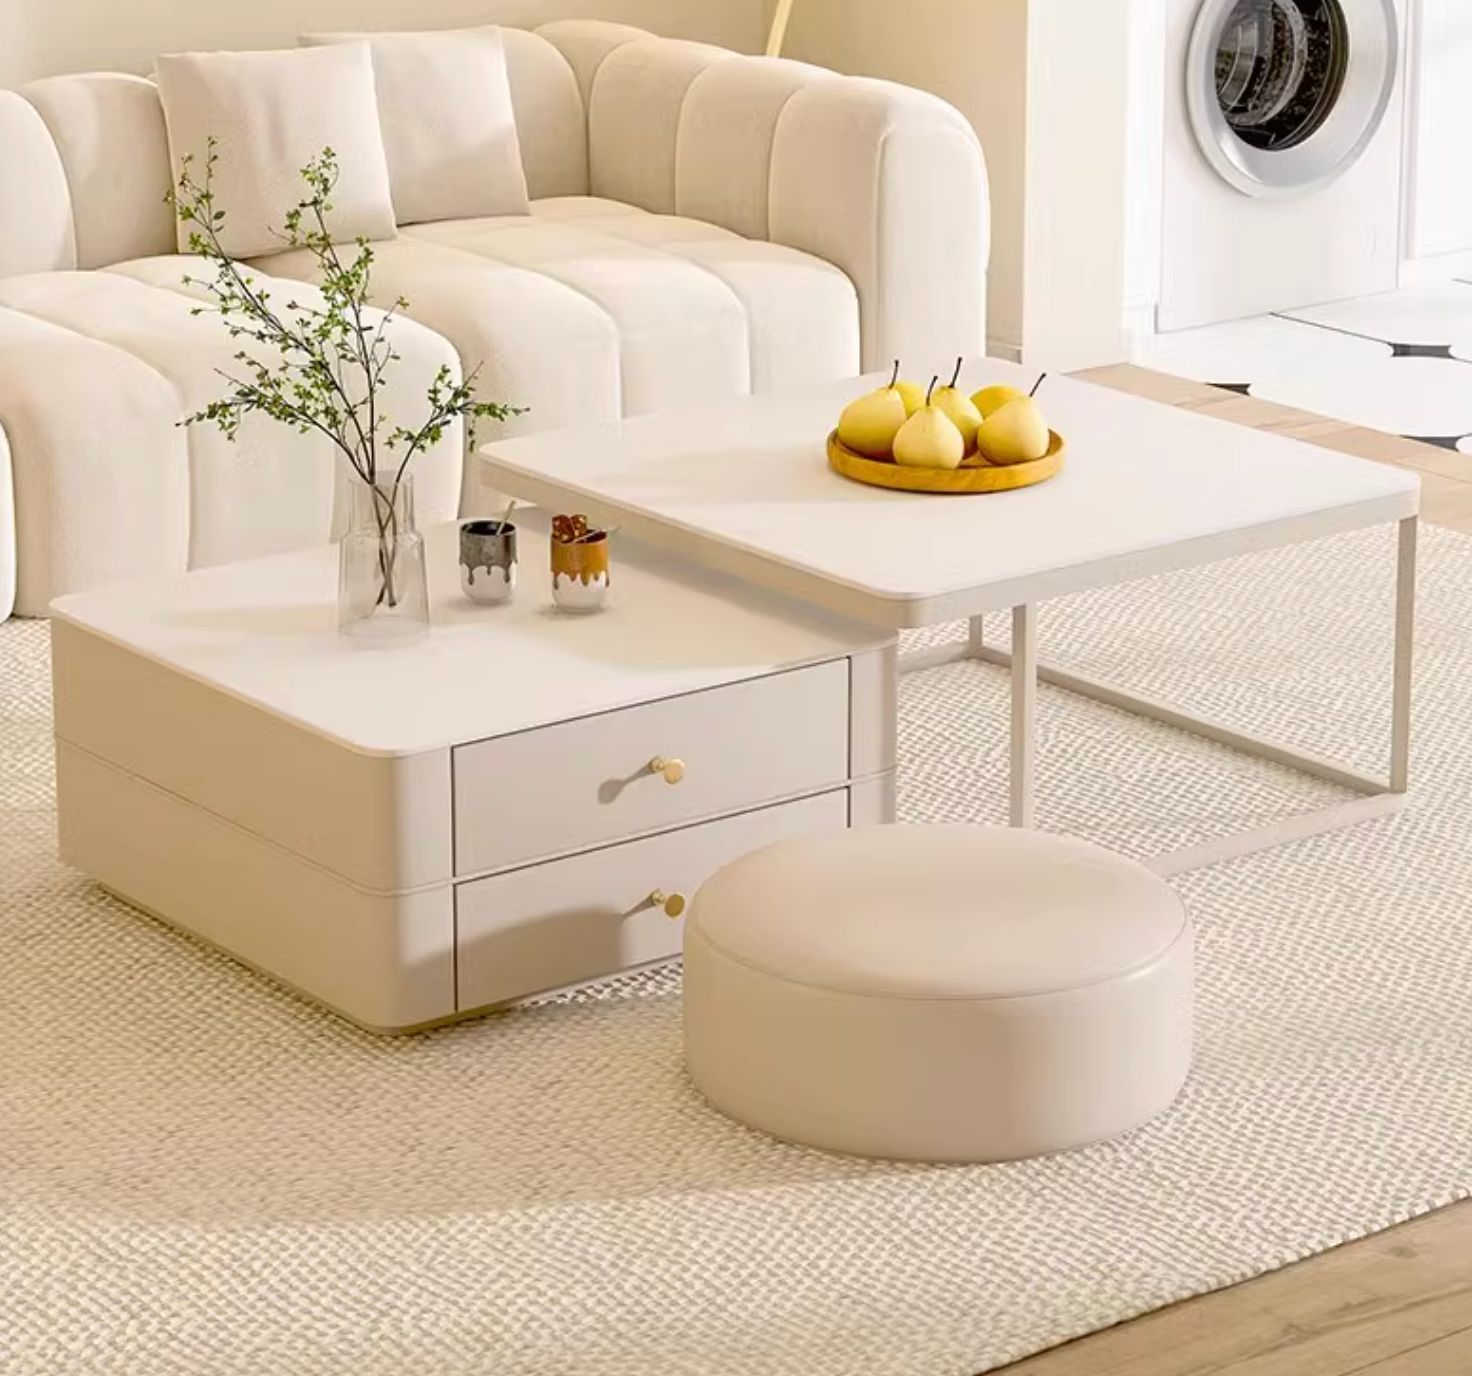 Eclipse Nesting Coffee Table SEt, White｜ DC Concept